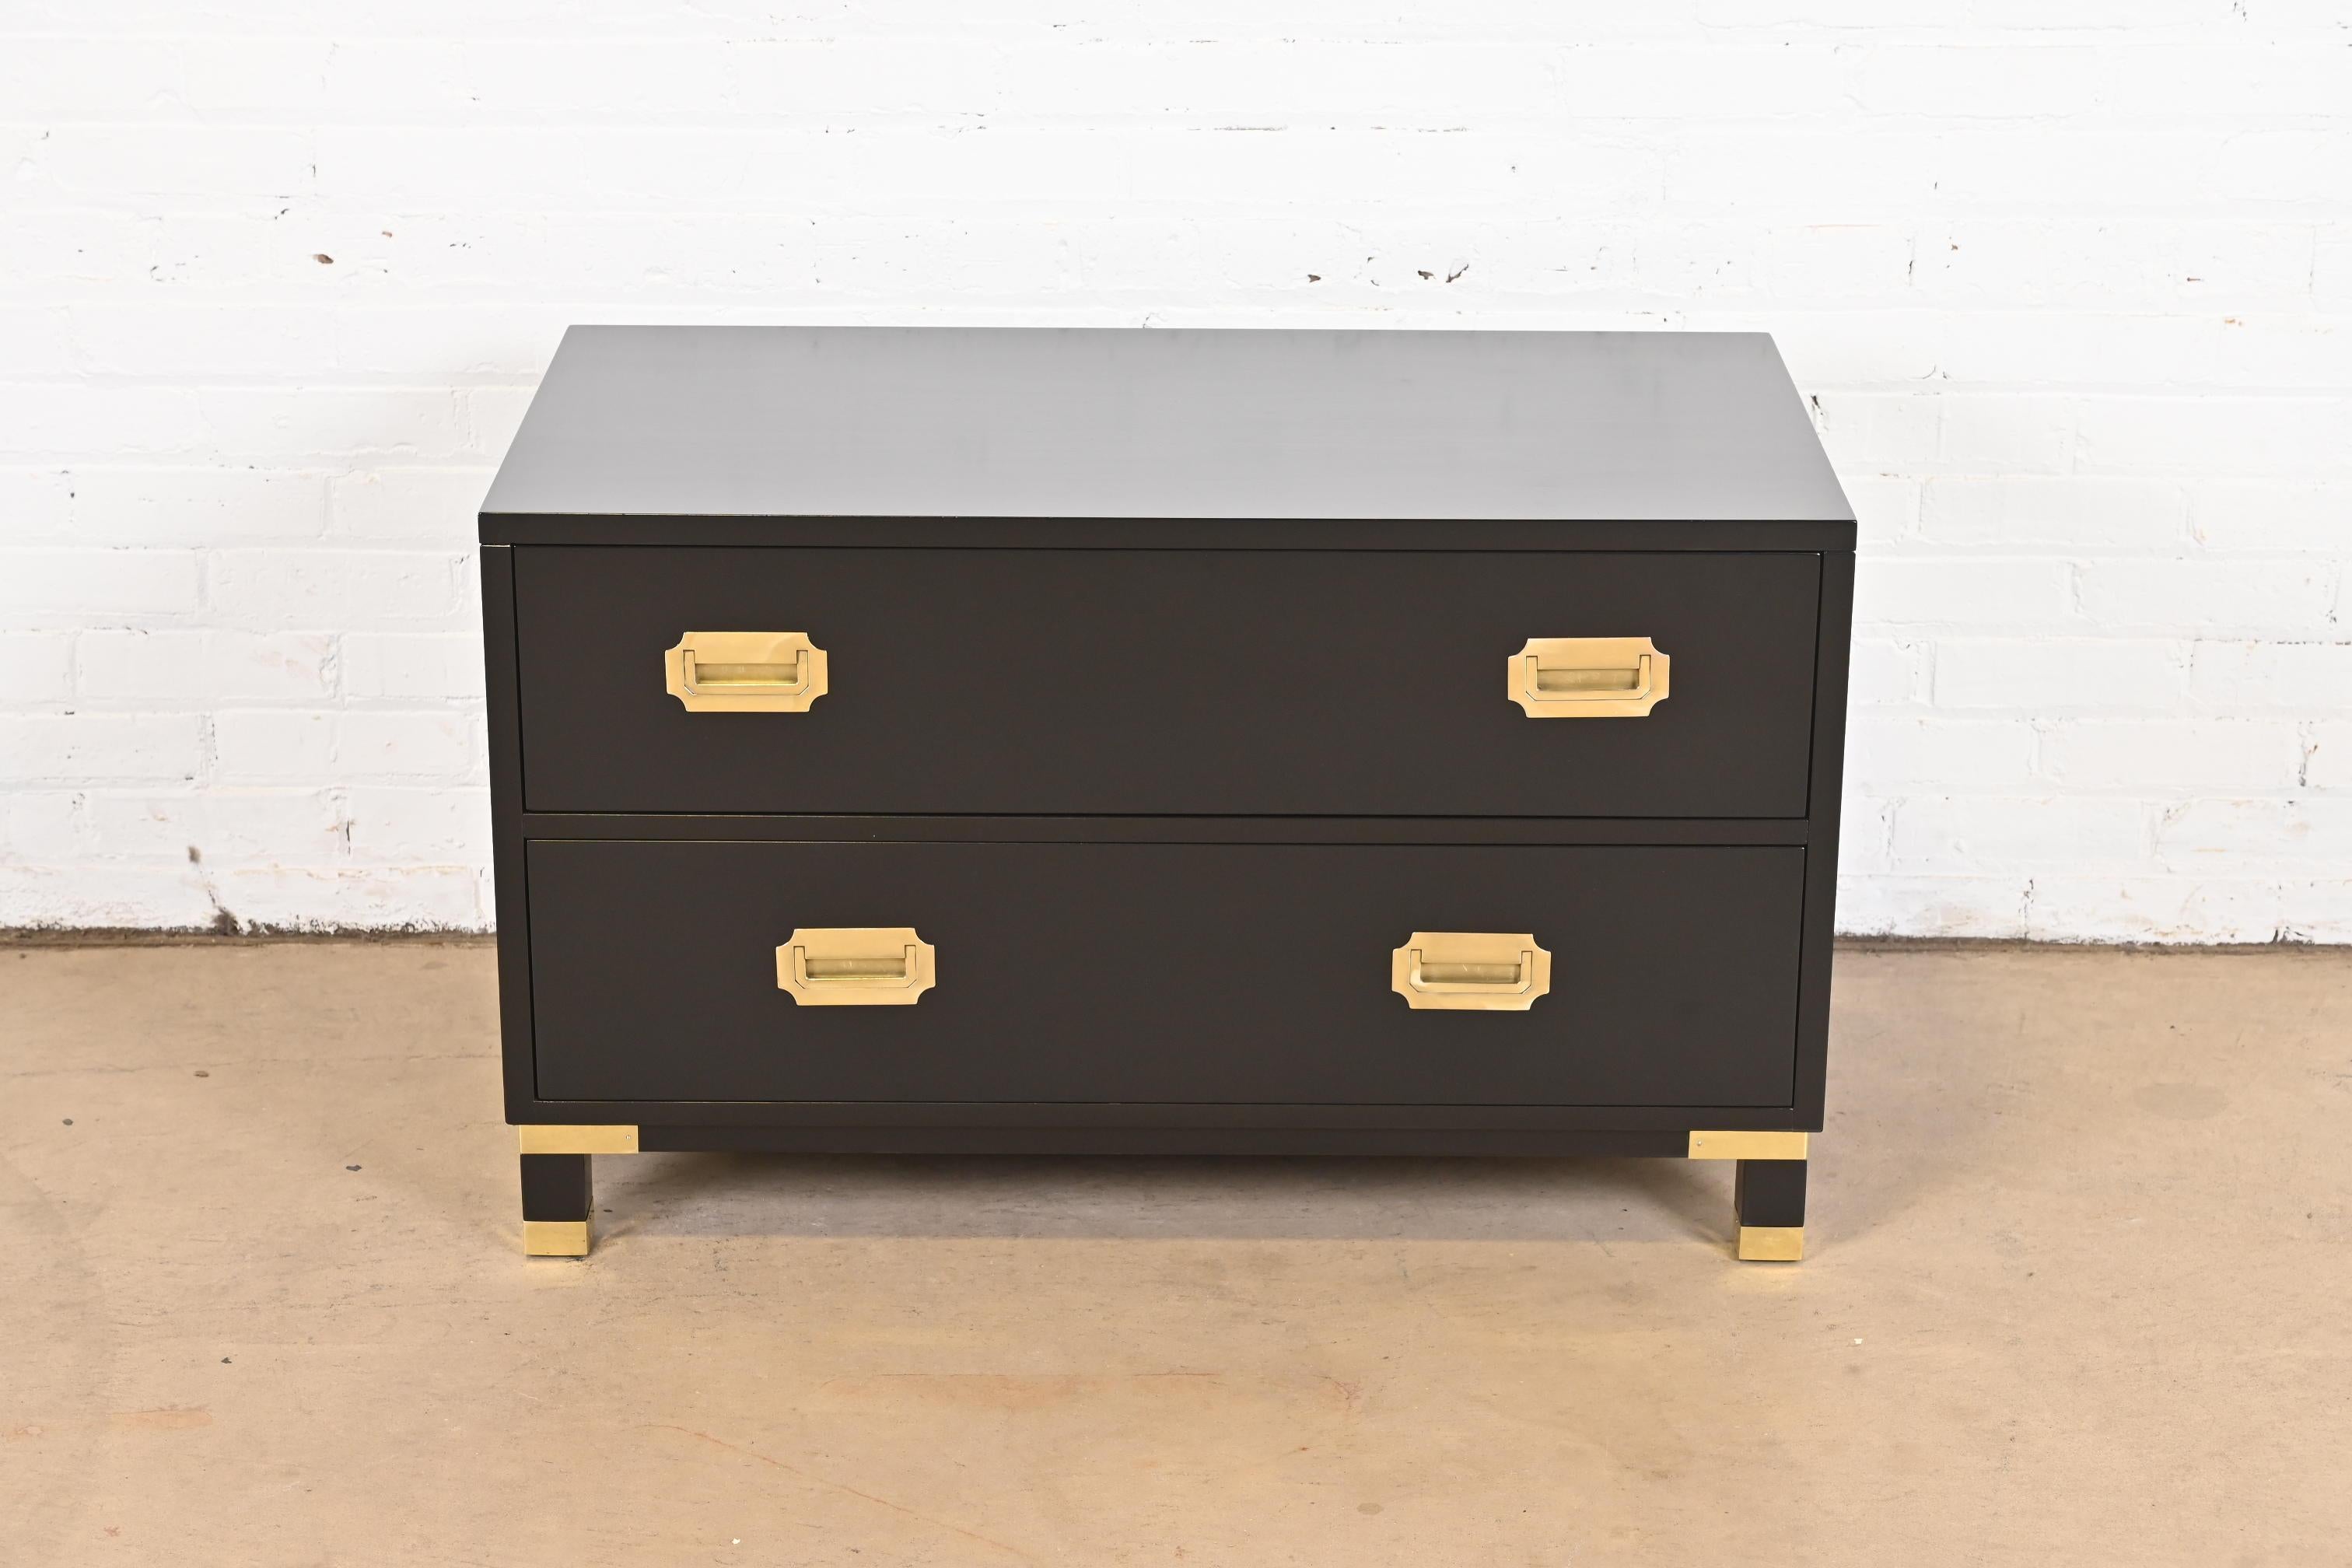 An exceptional Mid-Century Modern Hollywood Regency Campaign style two-drawer lowboy dresser or chest of drawers

By Baker Furniture, 